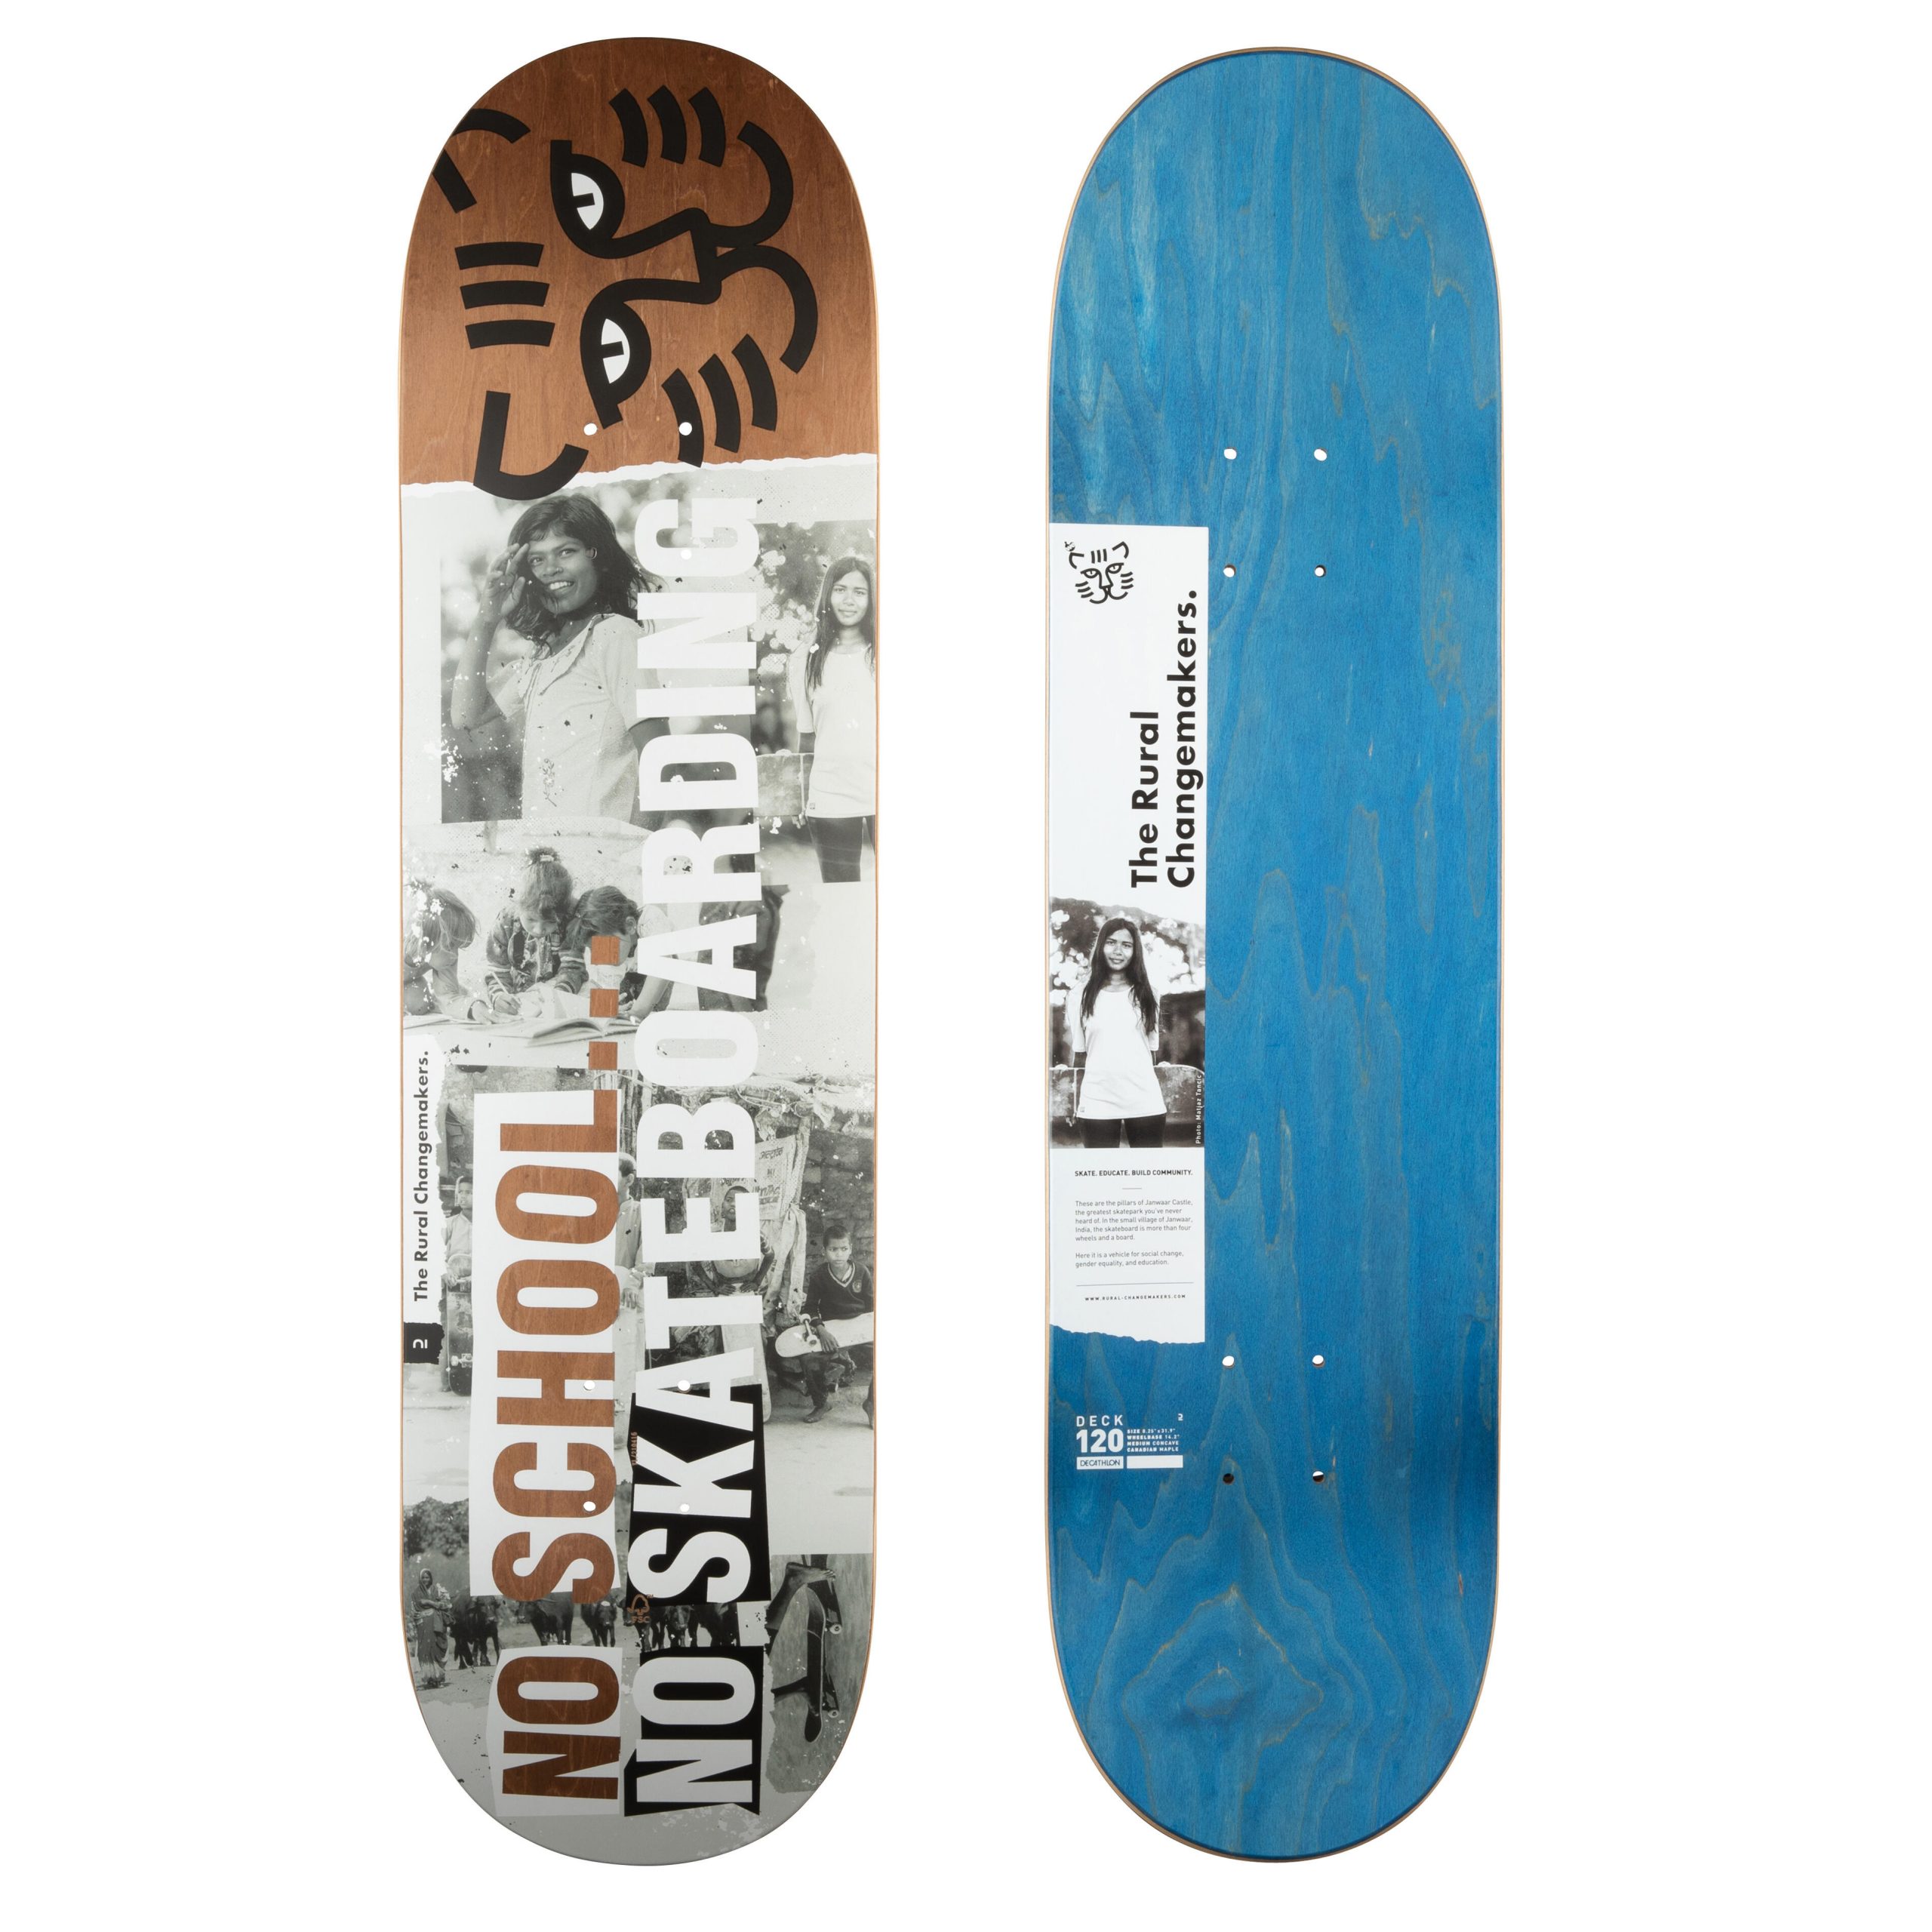 de studie Vorming contant geld Find Exclusive Design OXELO Skateboard Deck Maple DK120 "Rural  Changemakers" Size 8.25" | 49$ to match any outfit